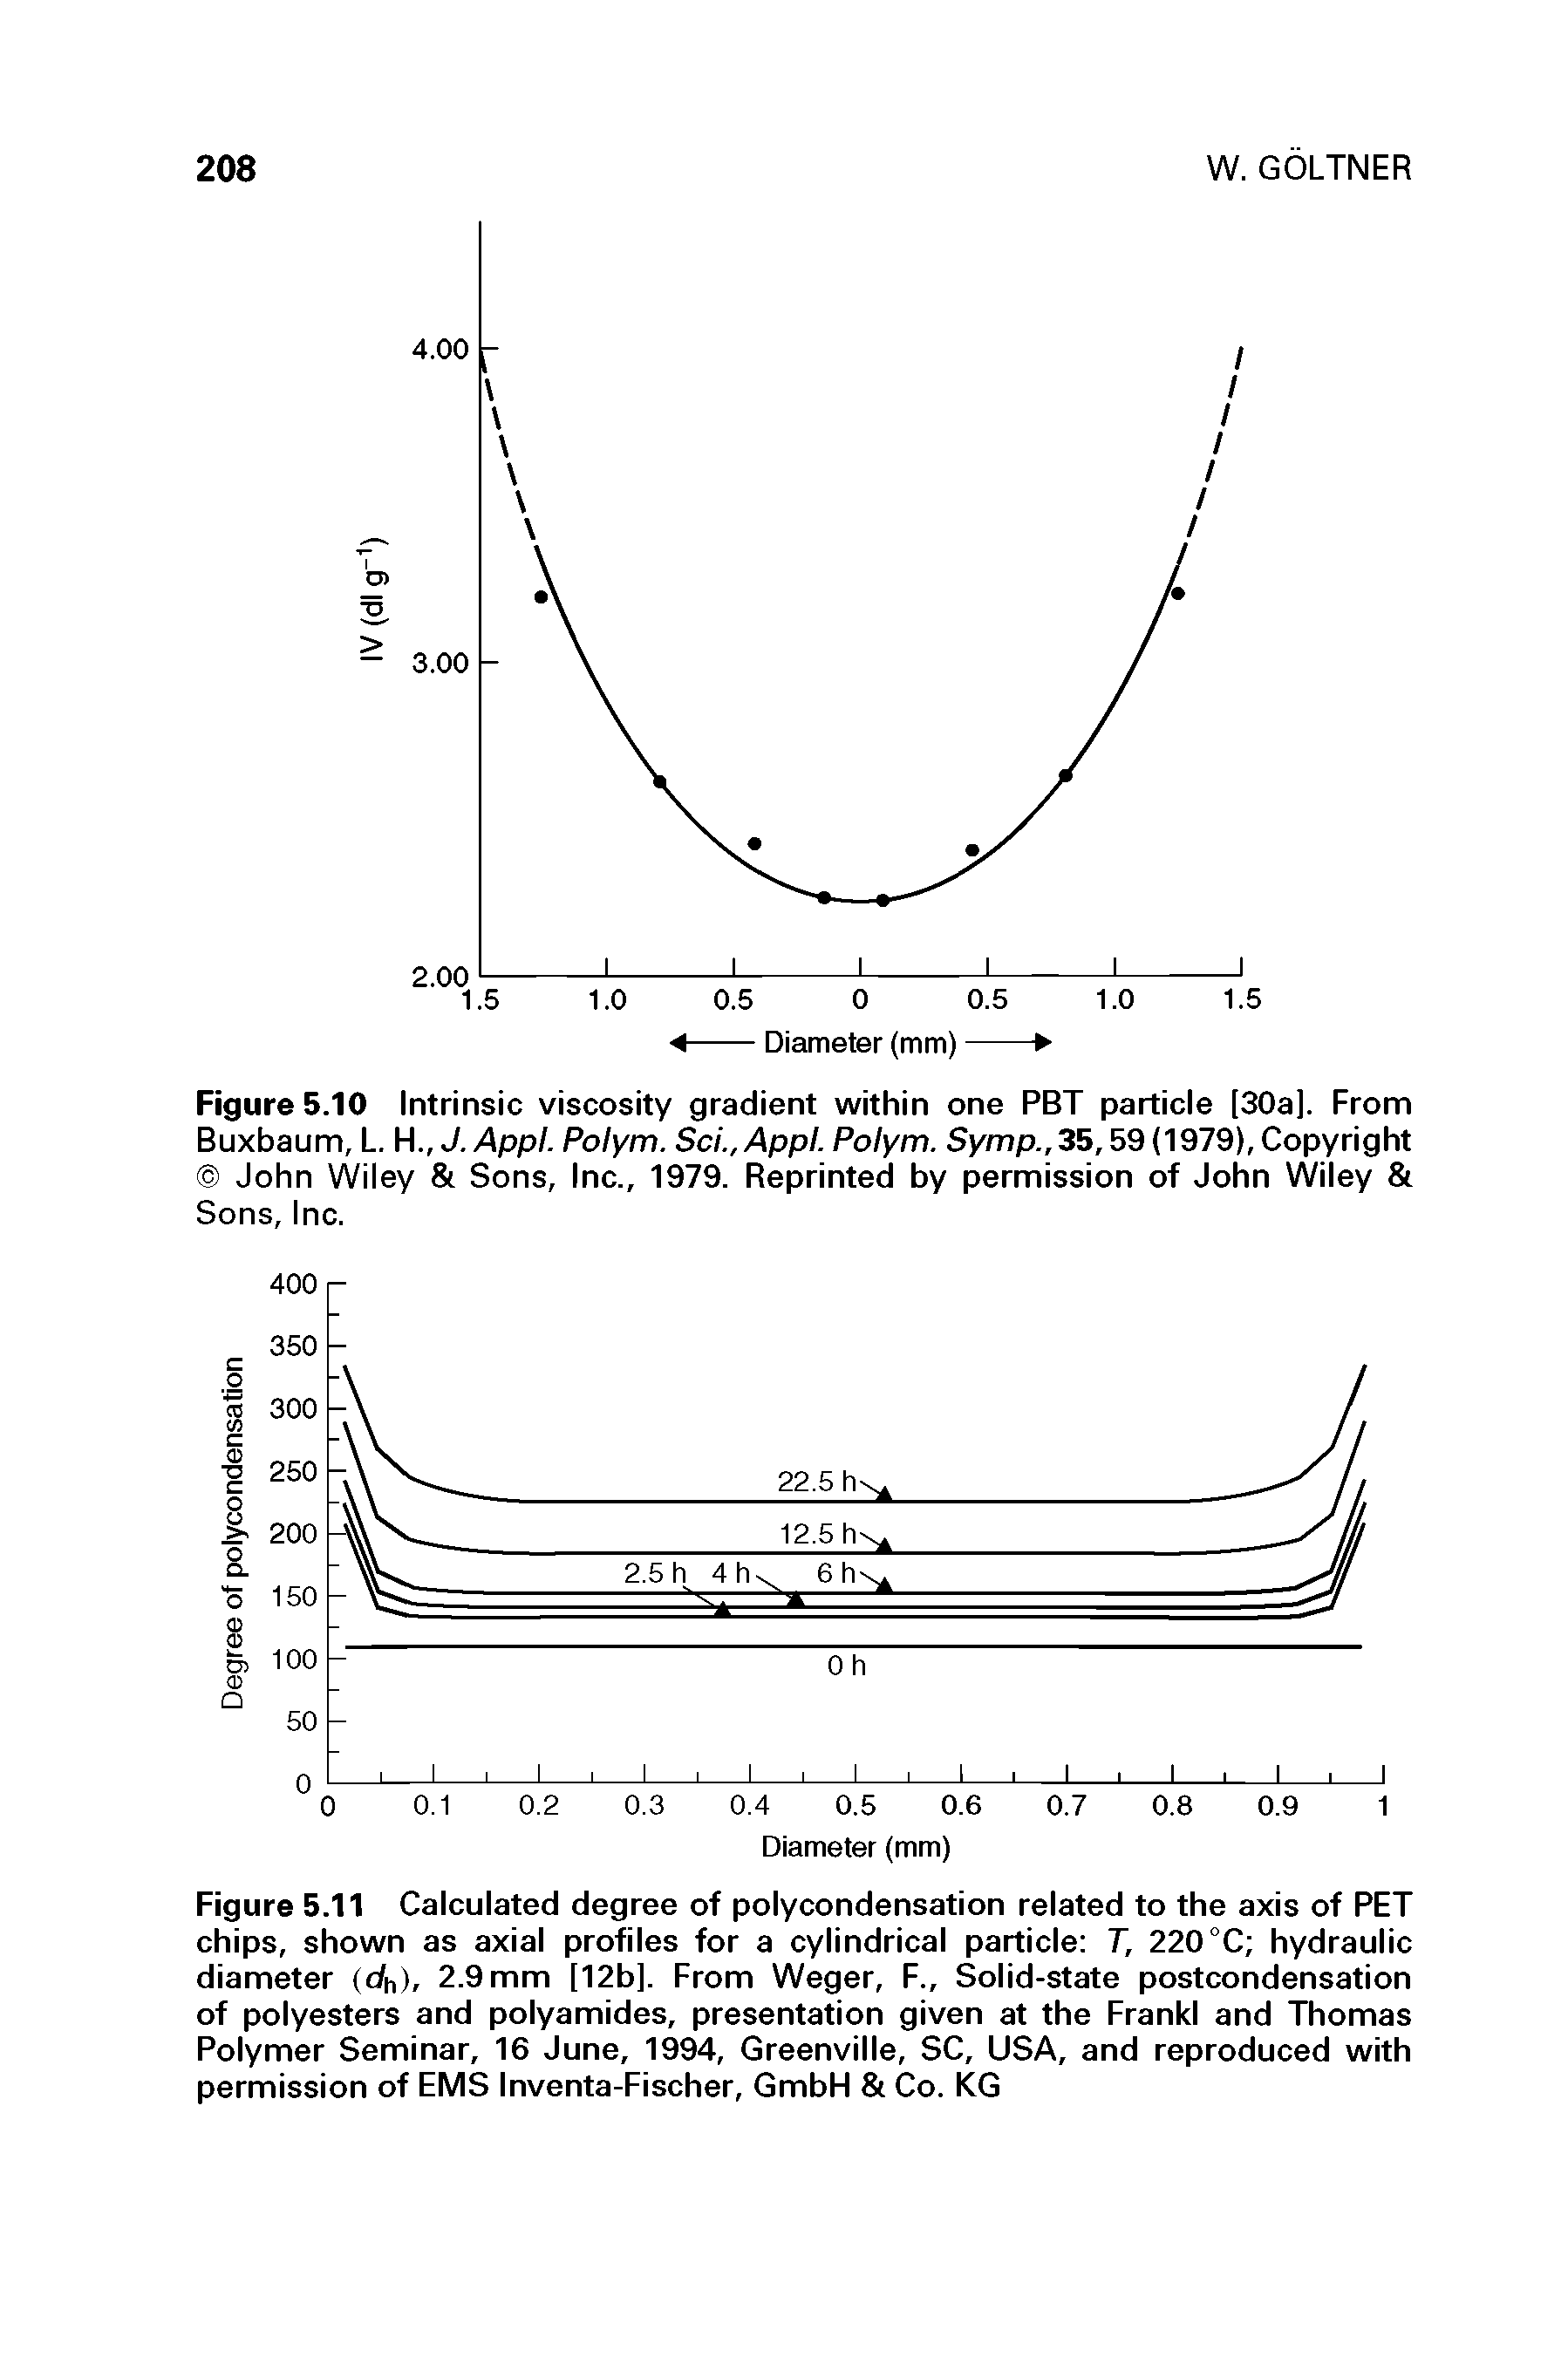 Figure 5.10 Intrinsic viscosity gradient within one PBT particle [30a]. From Buxbaum, L. H., J. Appl. Polym. Sci.,Appl. Polym. Symp., 35,59 (1979), Copyright John Wiley Sons, Inc., 1979. Reprinted by permission of John Wiley Sons, Inc.